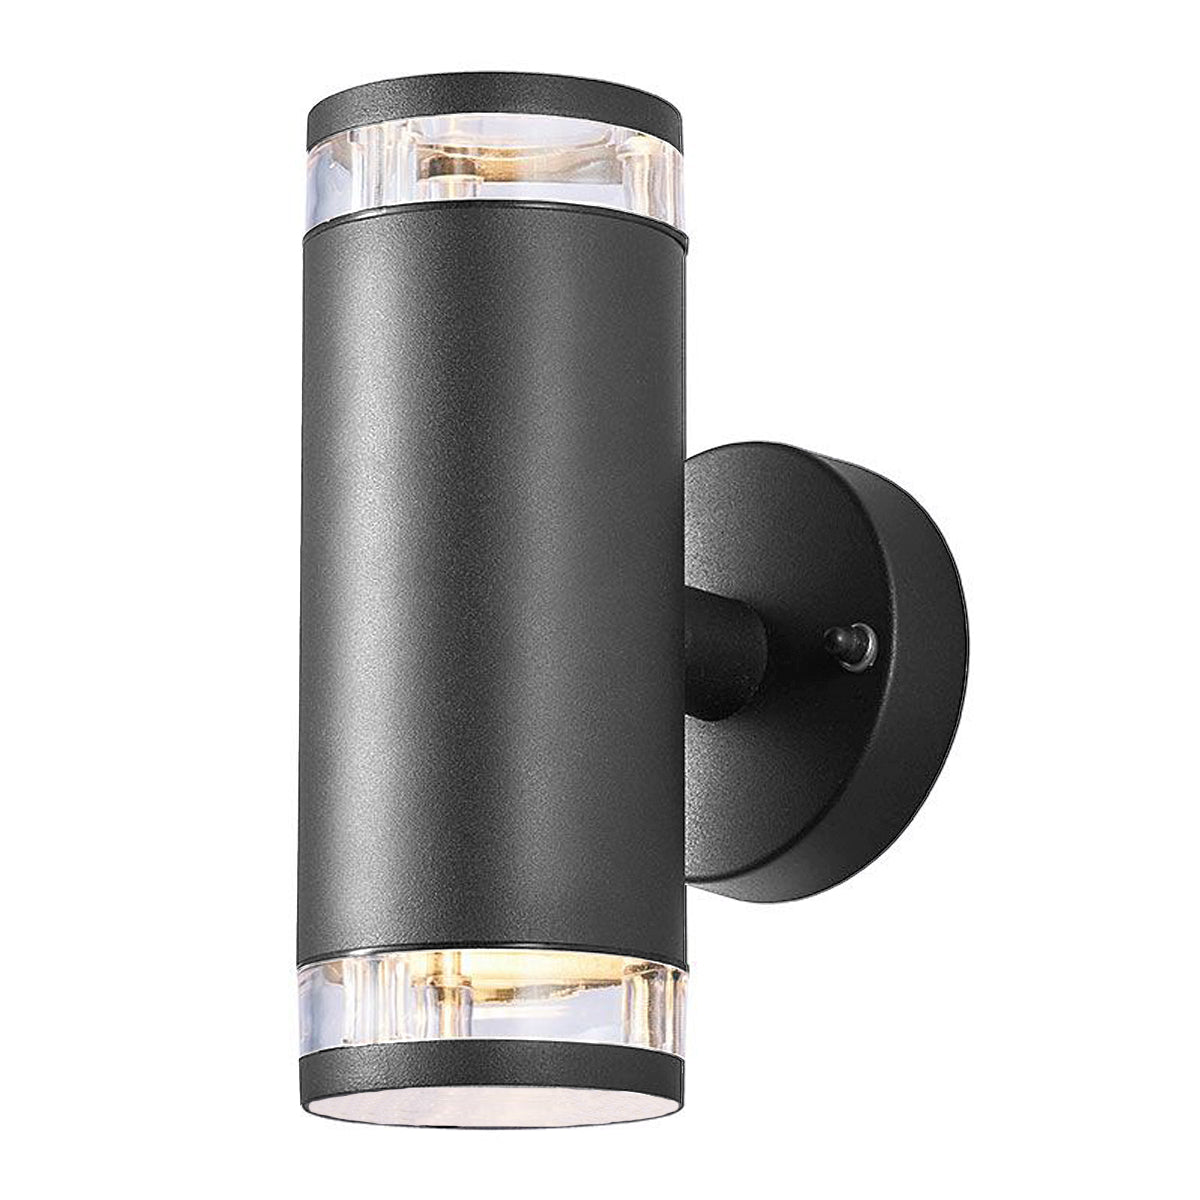 Our Jennifer dark grey outdoor wall mounted up and down cylinder outdoor light would look perfect in a modern or more traditional home design. Outside wall lights can provide atmospheric light in your garden, at the front door or on the terrace as well as a great security solution. It is designed for durability and longevity with its robust material producing a fully weatherproof and water resistant light fitting